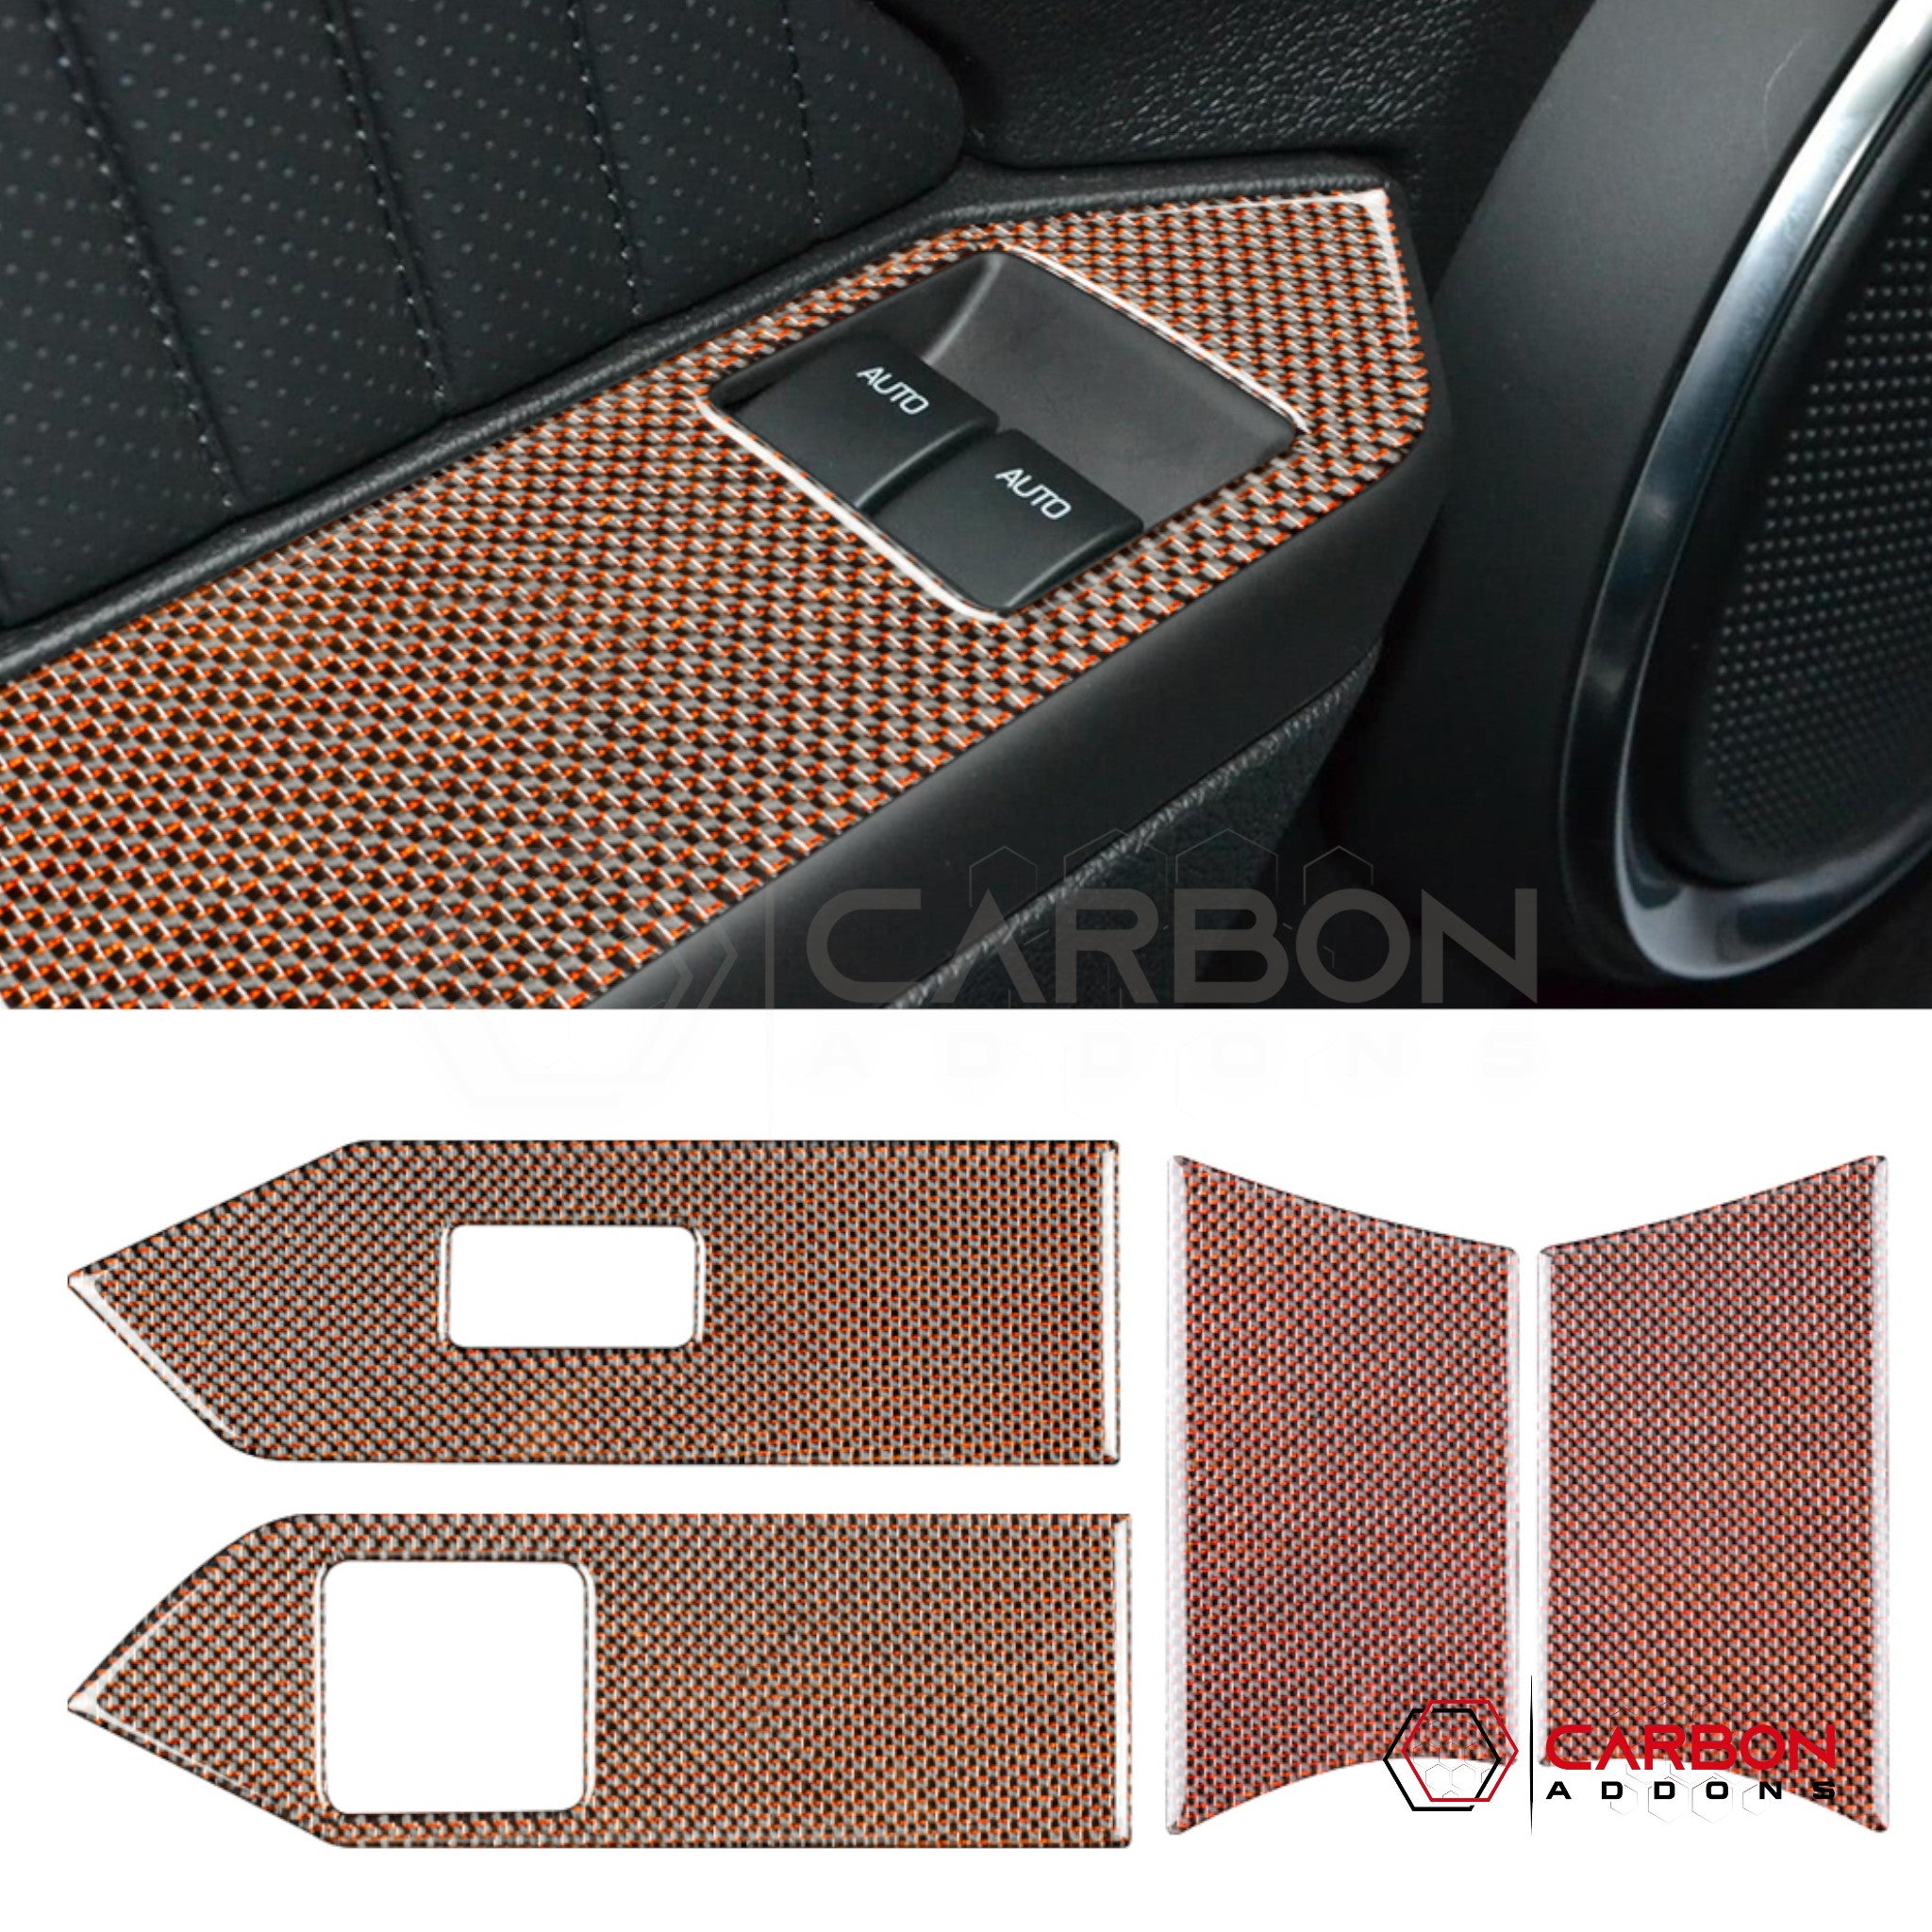 Mustang 2010-2014 Reflective Carbon Fiber Window Switch Trim Overlay